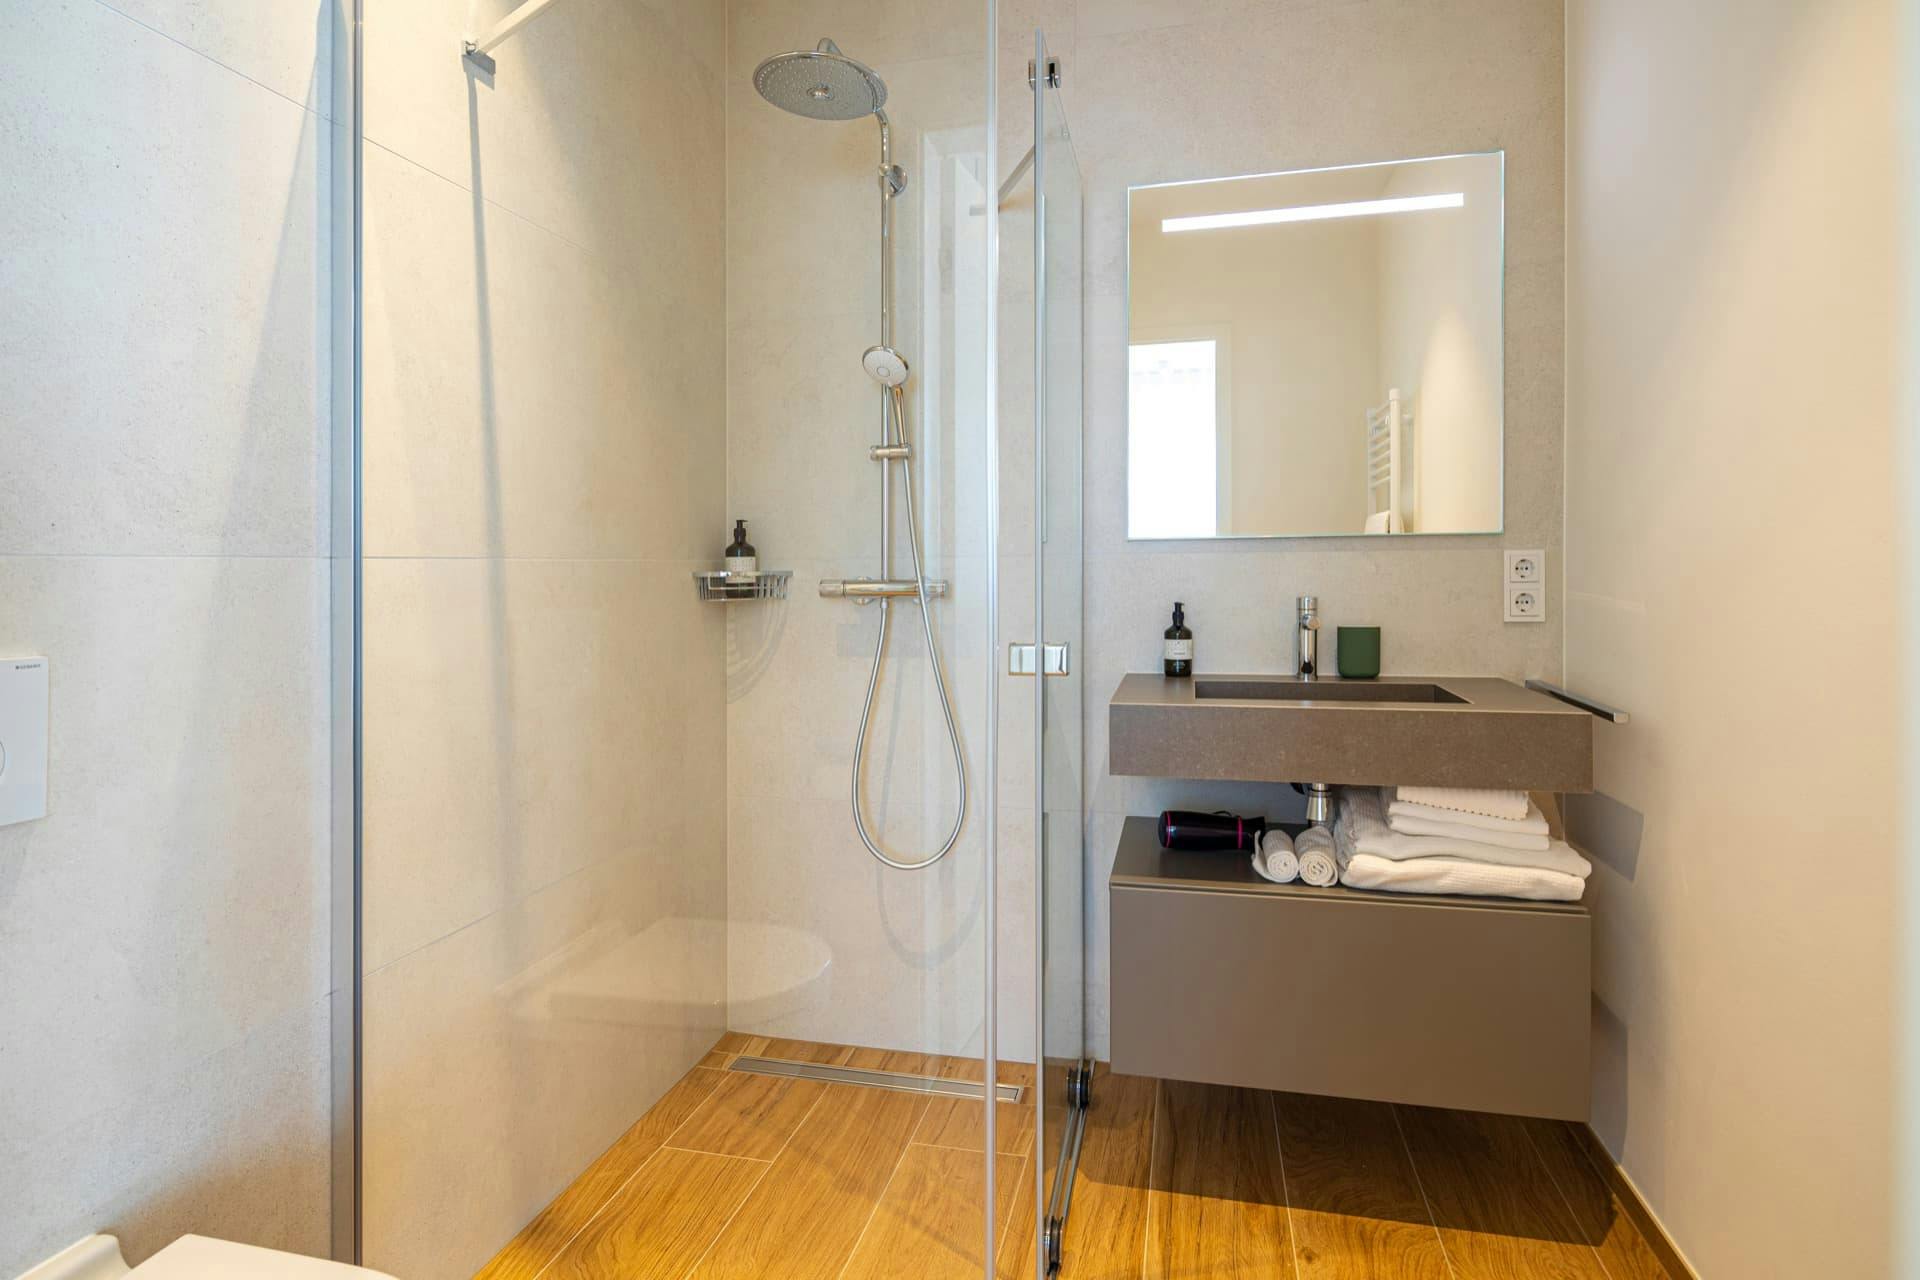 En-suite bathroom picture displaying a shower with shower gel, a sink with soap, a toothbrush cup, and towels below. Reflected heat radiator in the mirror above the sink, with two electric sockets on the right.